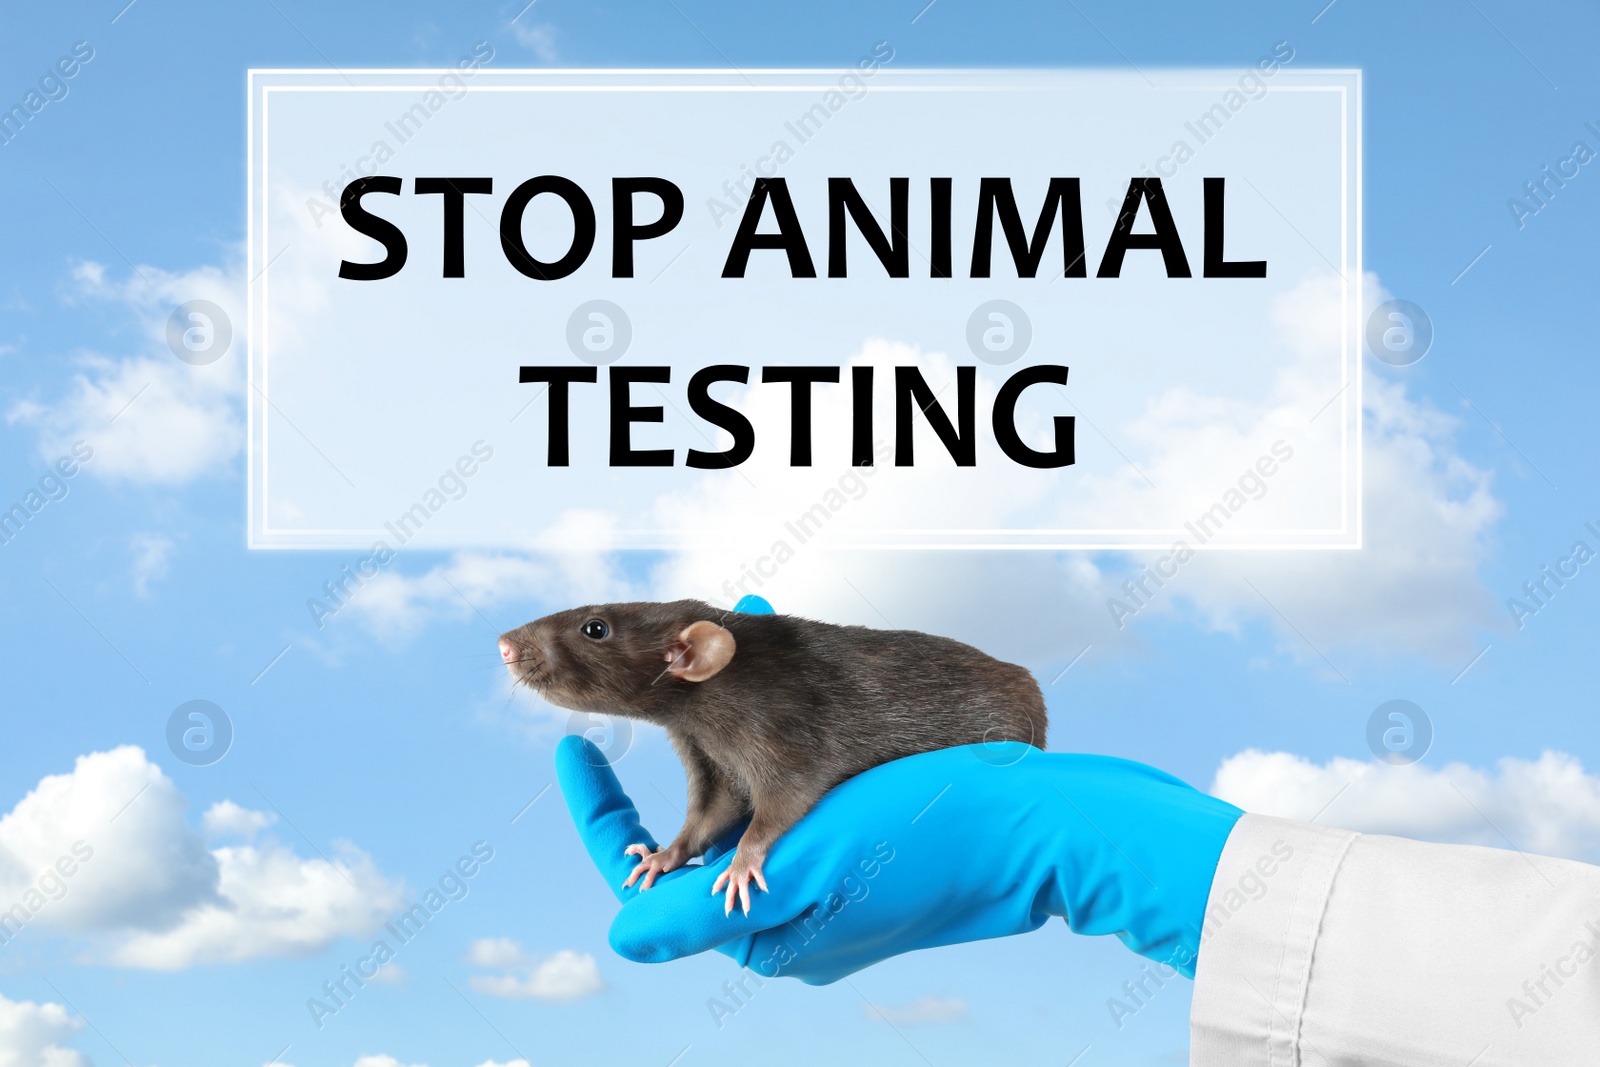 Image of STOP ANIMAL TESTING. Scientist holding laboratory rat against blue sky, closeup